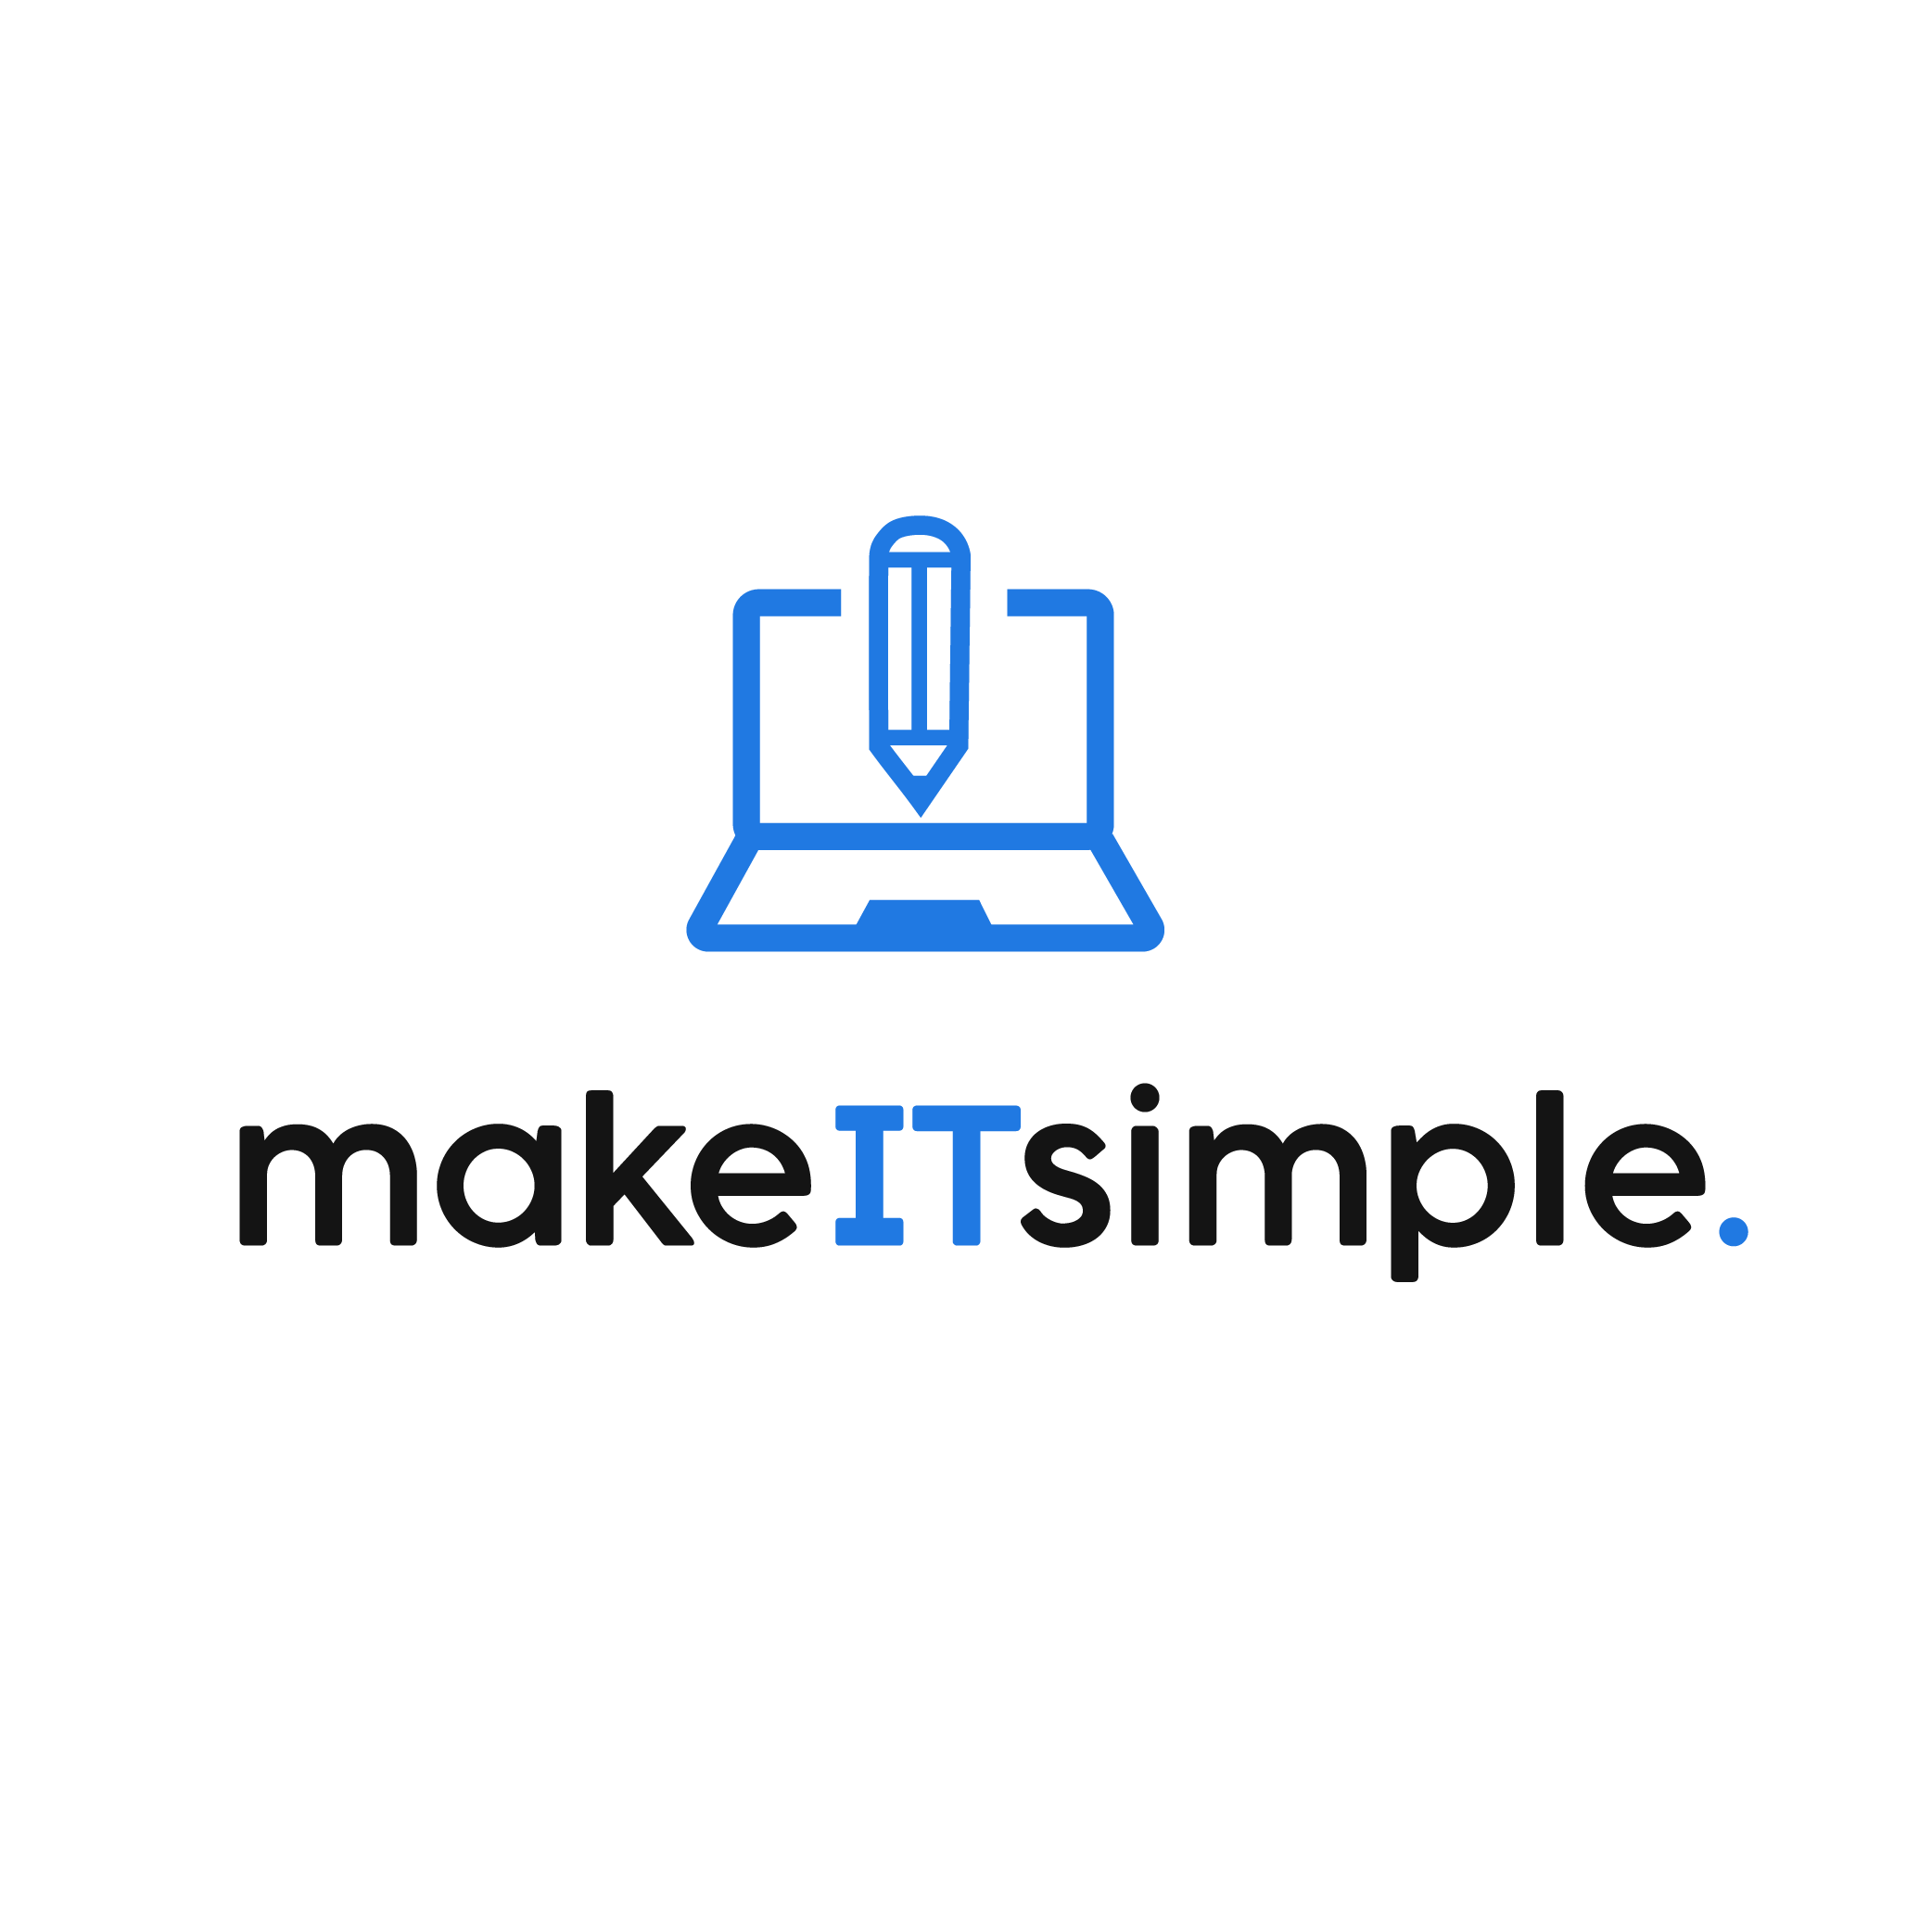 Make Information Technology Simple